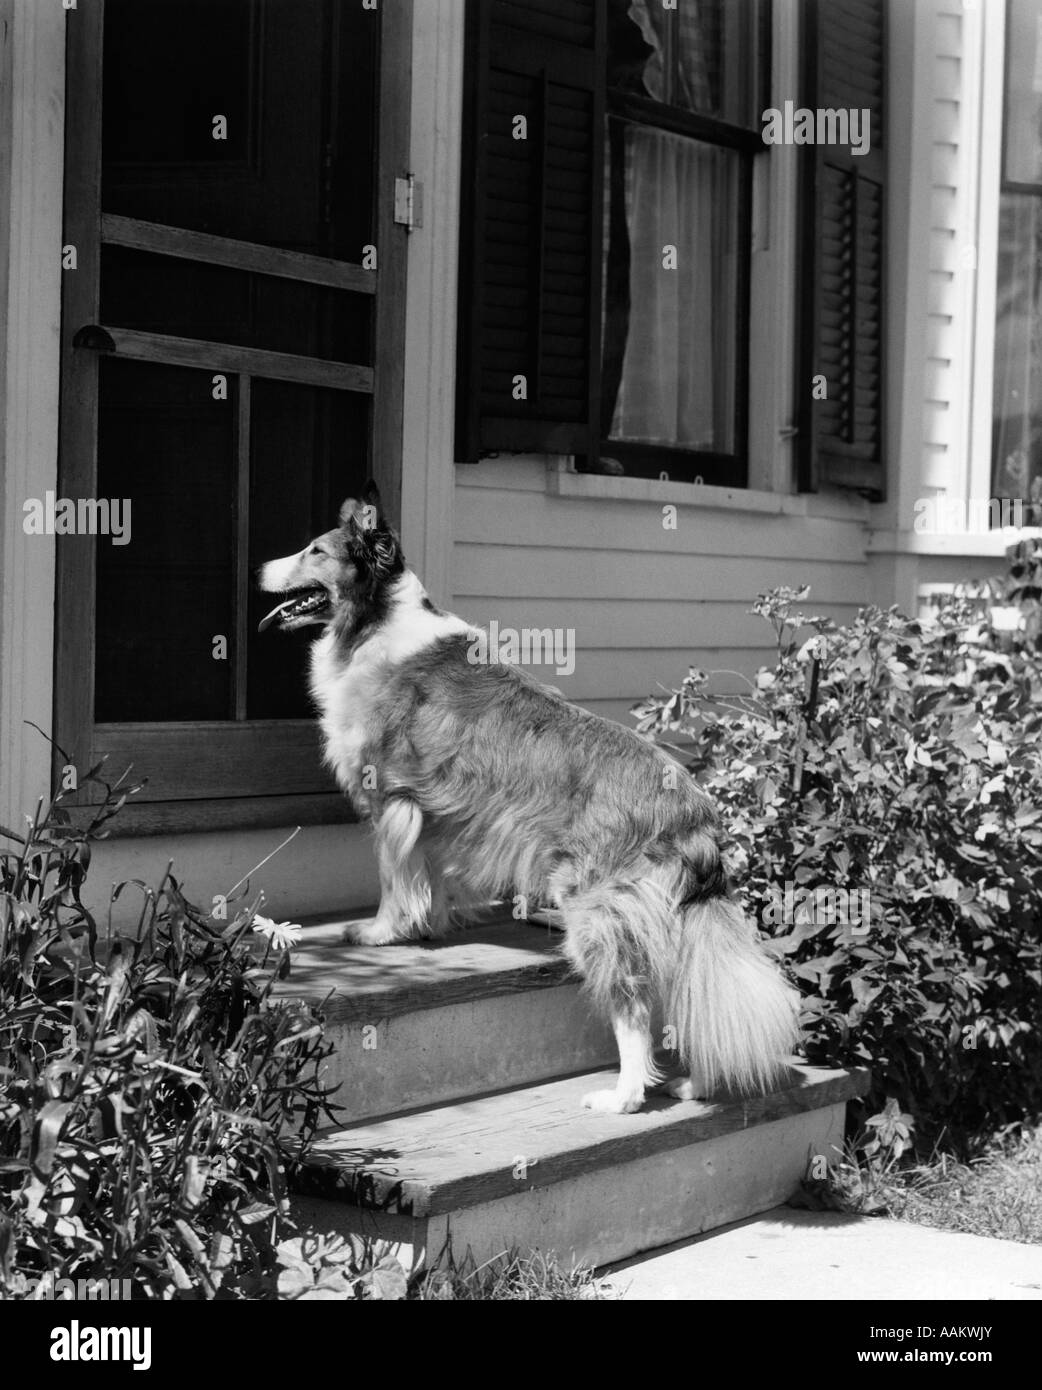 1930s ROUGH SCOTCH COLLIE DOG STANDING ON BACK DOORSTEP OF HOUSE WAITING TO BE LET IN Stock Photo